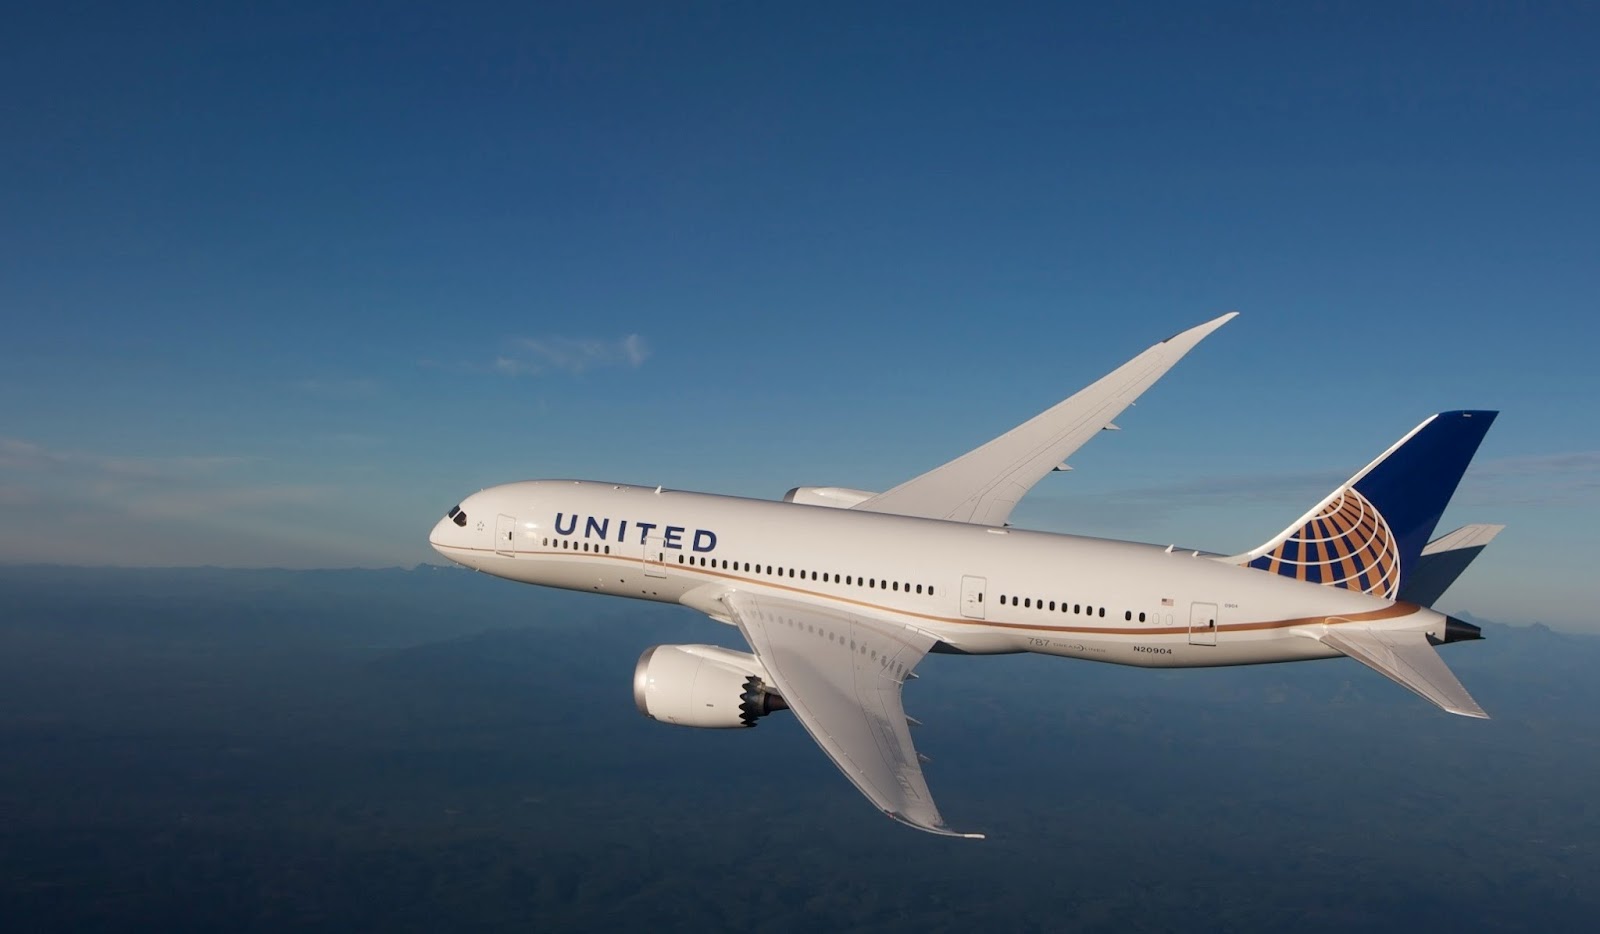 United Airlines Boeing 787-9 Dreamliner - United Airlines Airplane In The Air - HD Wallpaper 